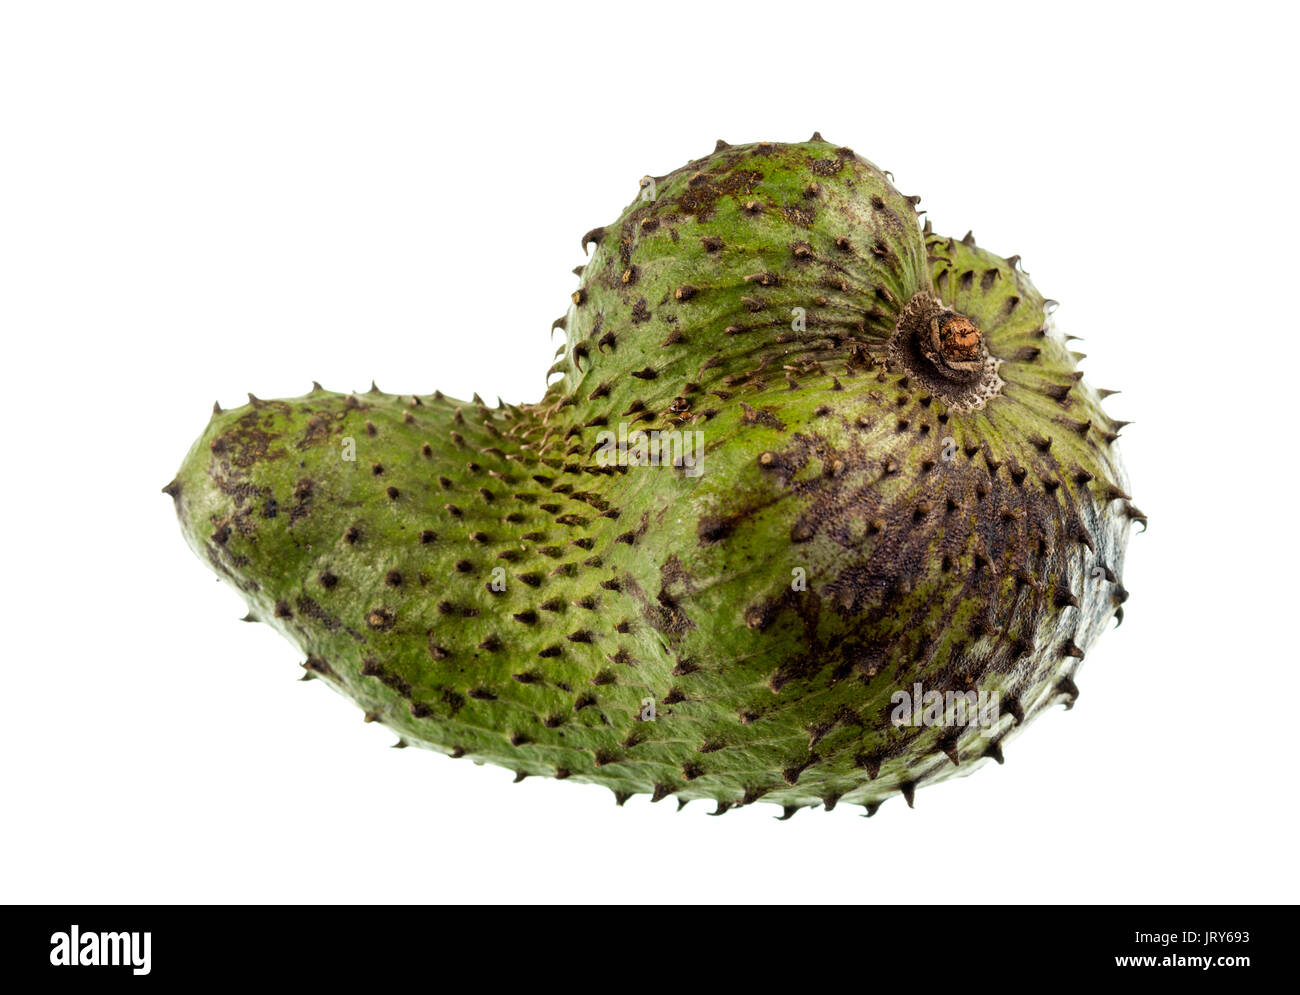 Soursop is a dark green and prickly fruit of the broadleaf evergreen tree Annona muricata, with a juicy, acid, whitish and aromatic flesh. Stock Photo